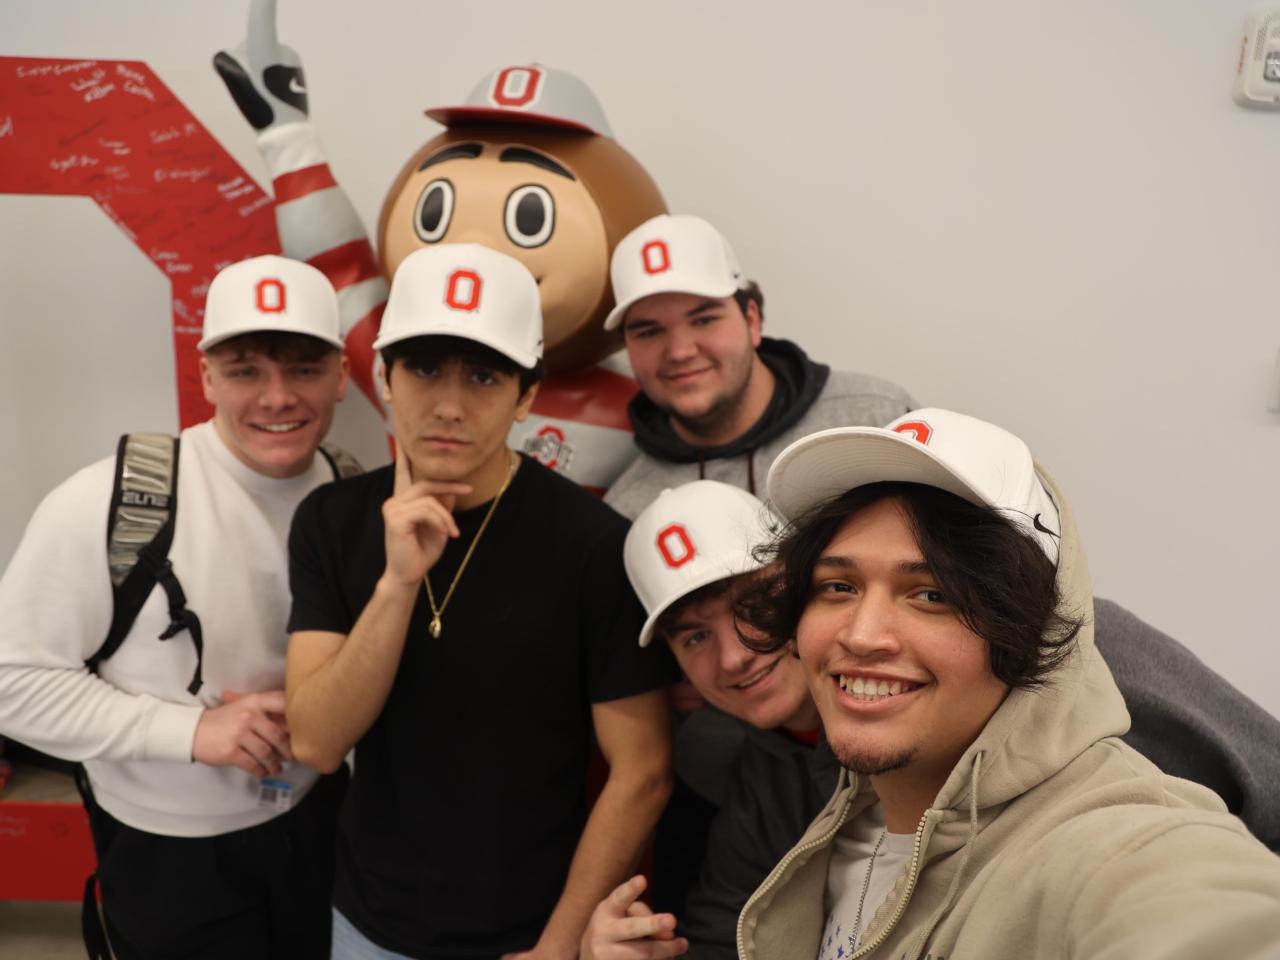 Ohio State Lima students show off their new hats